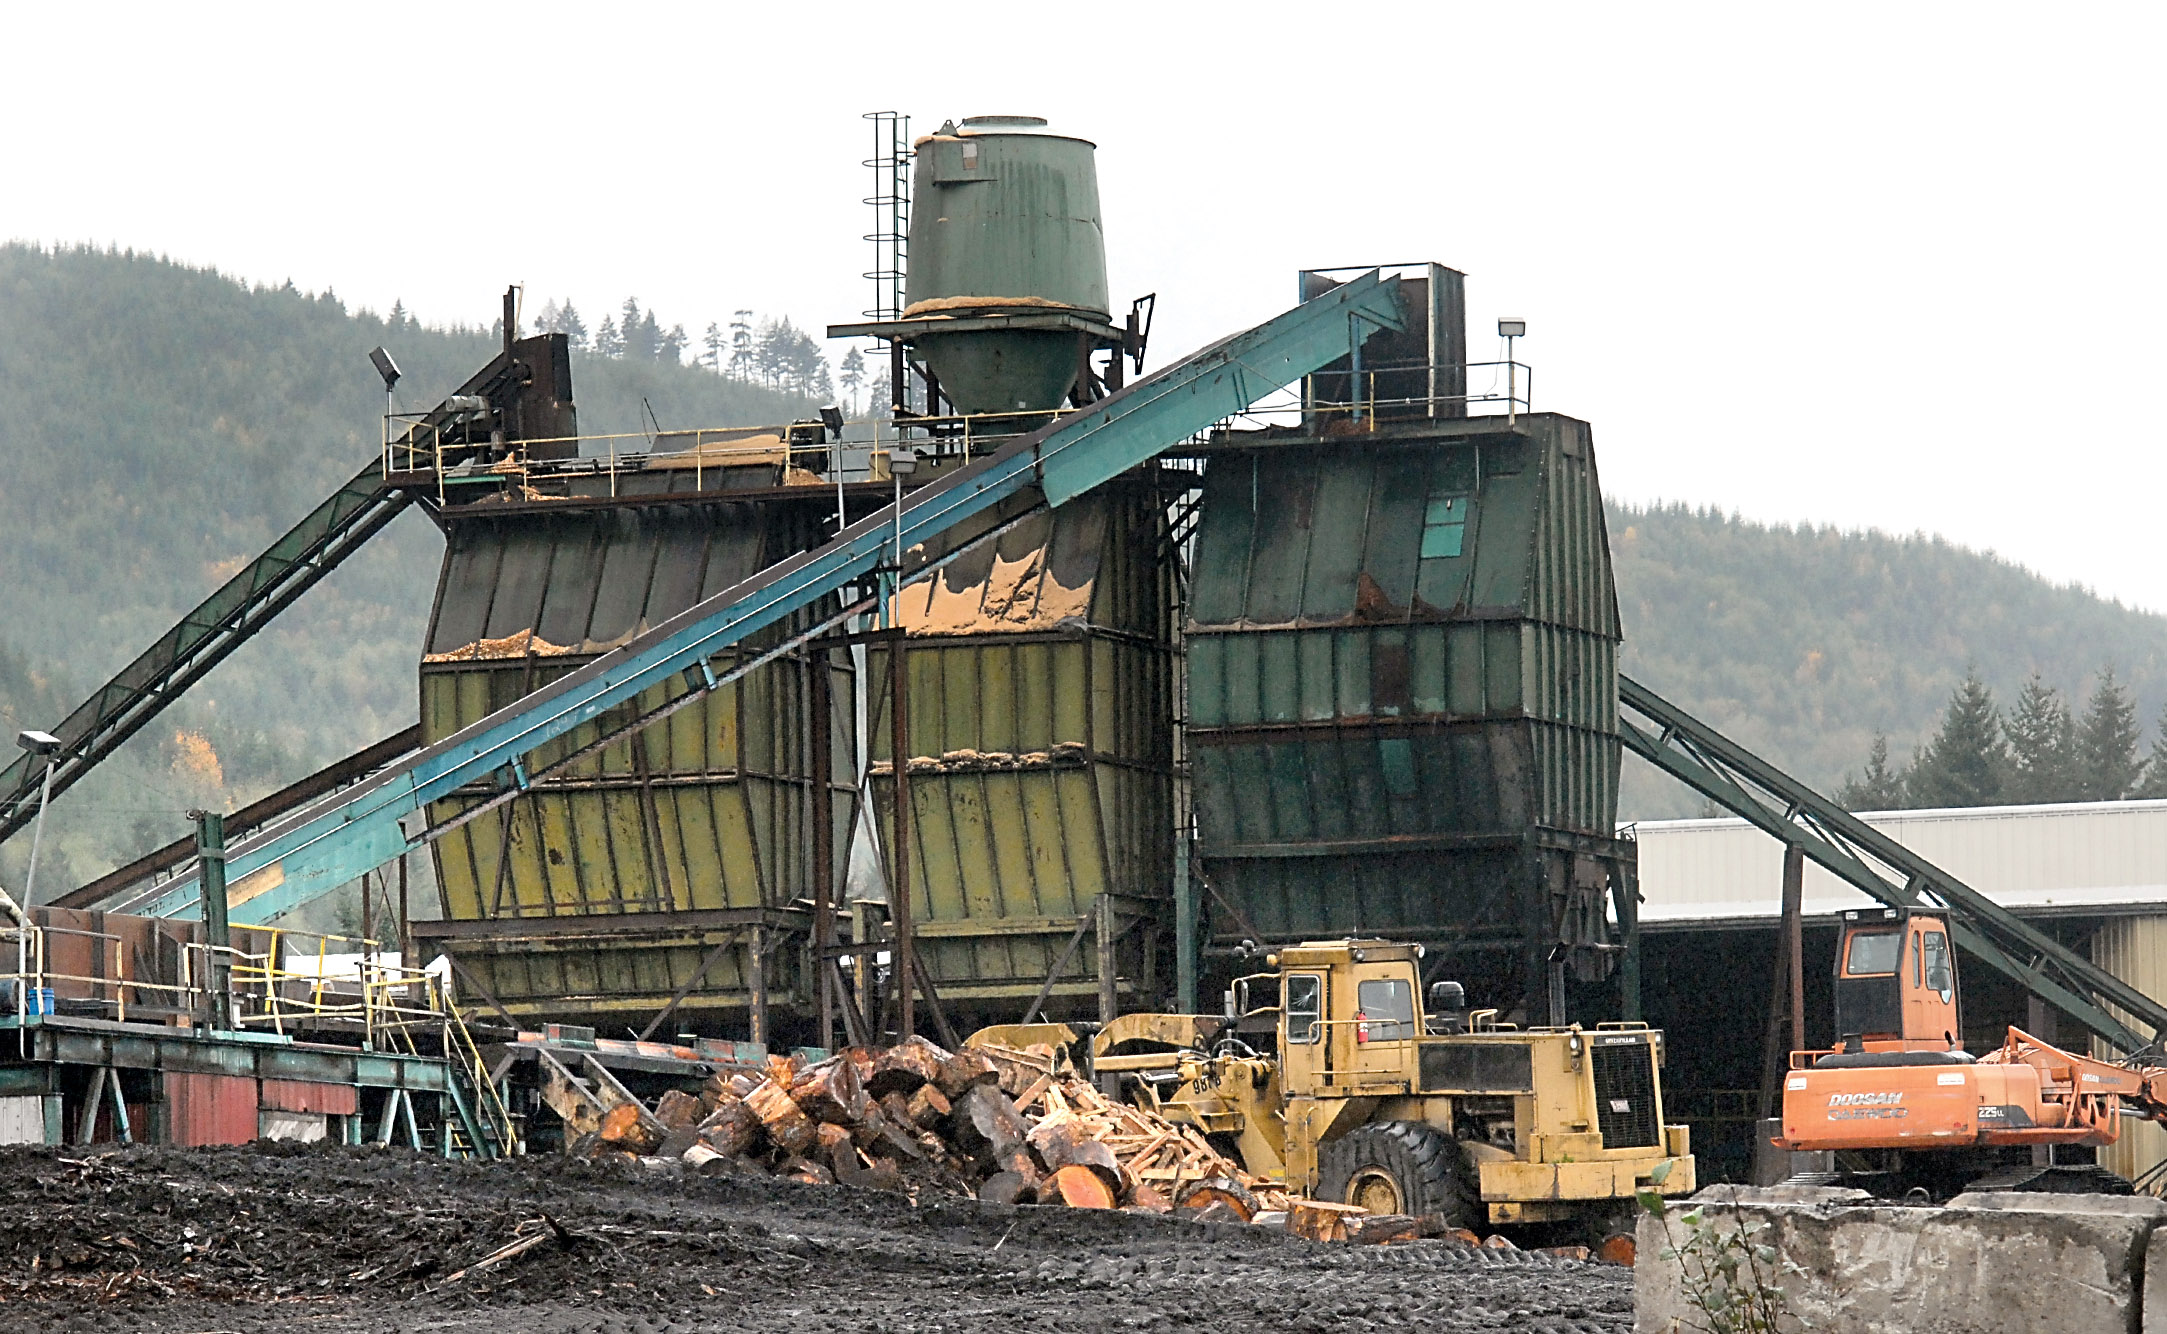 Equipment sits idle at the Green Creek Wood Products location in the Eclipse Industrial Park on the west edge of Port Angeles on Thursday. Keith Thorpe/Peninsula Daily News